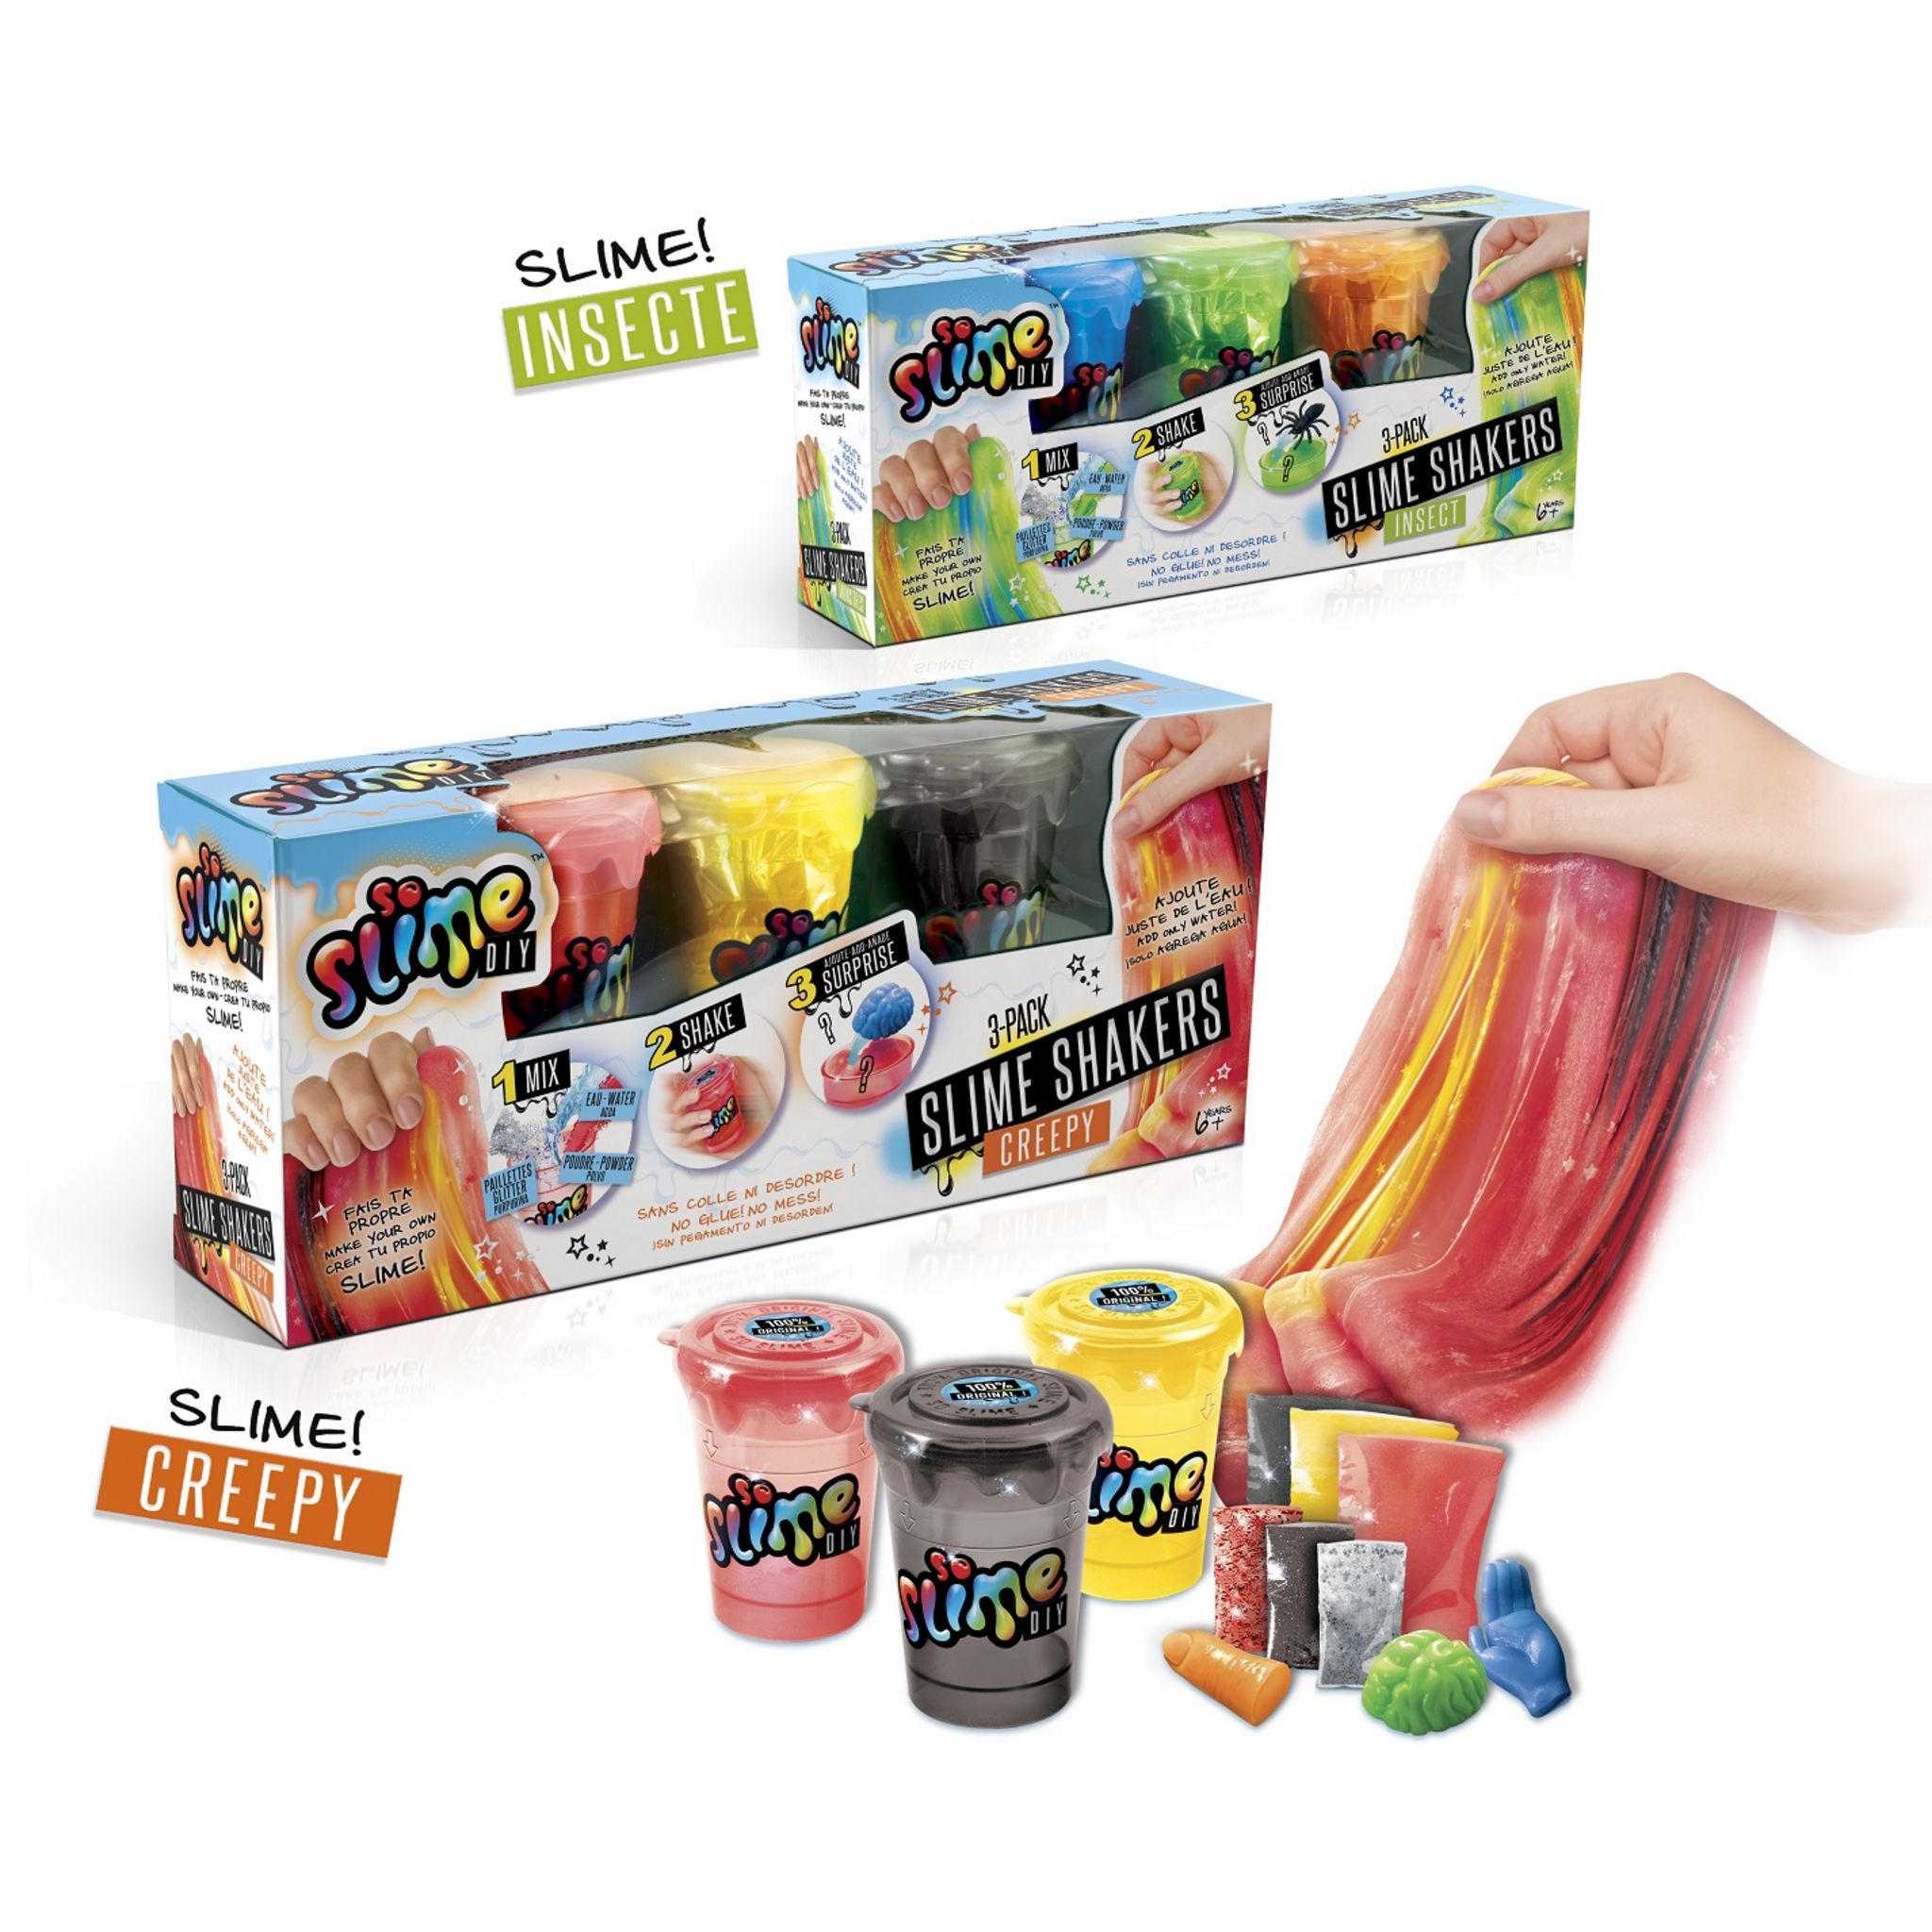 CANAL TOYS Slime shaker x 3 garcon pas cher 